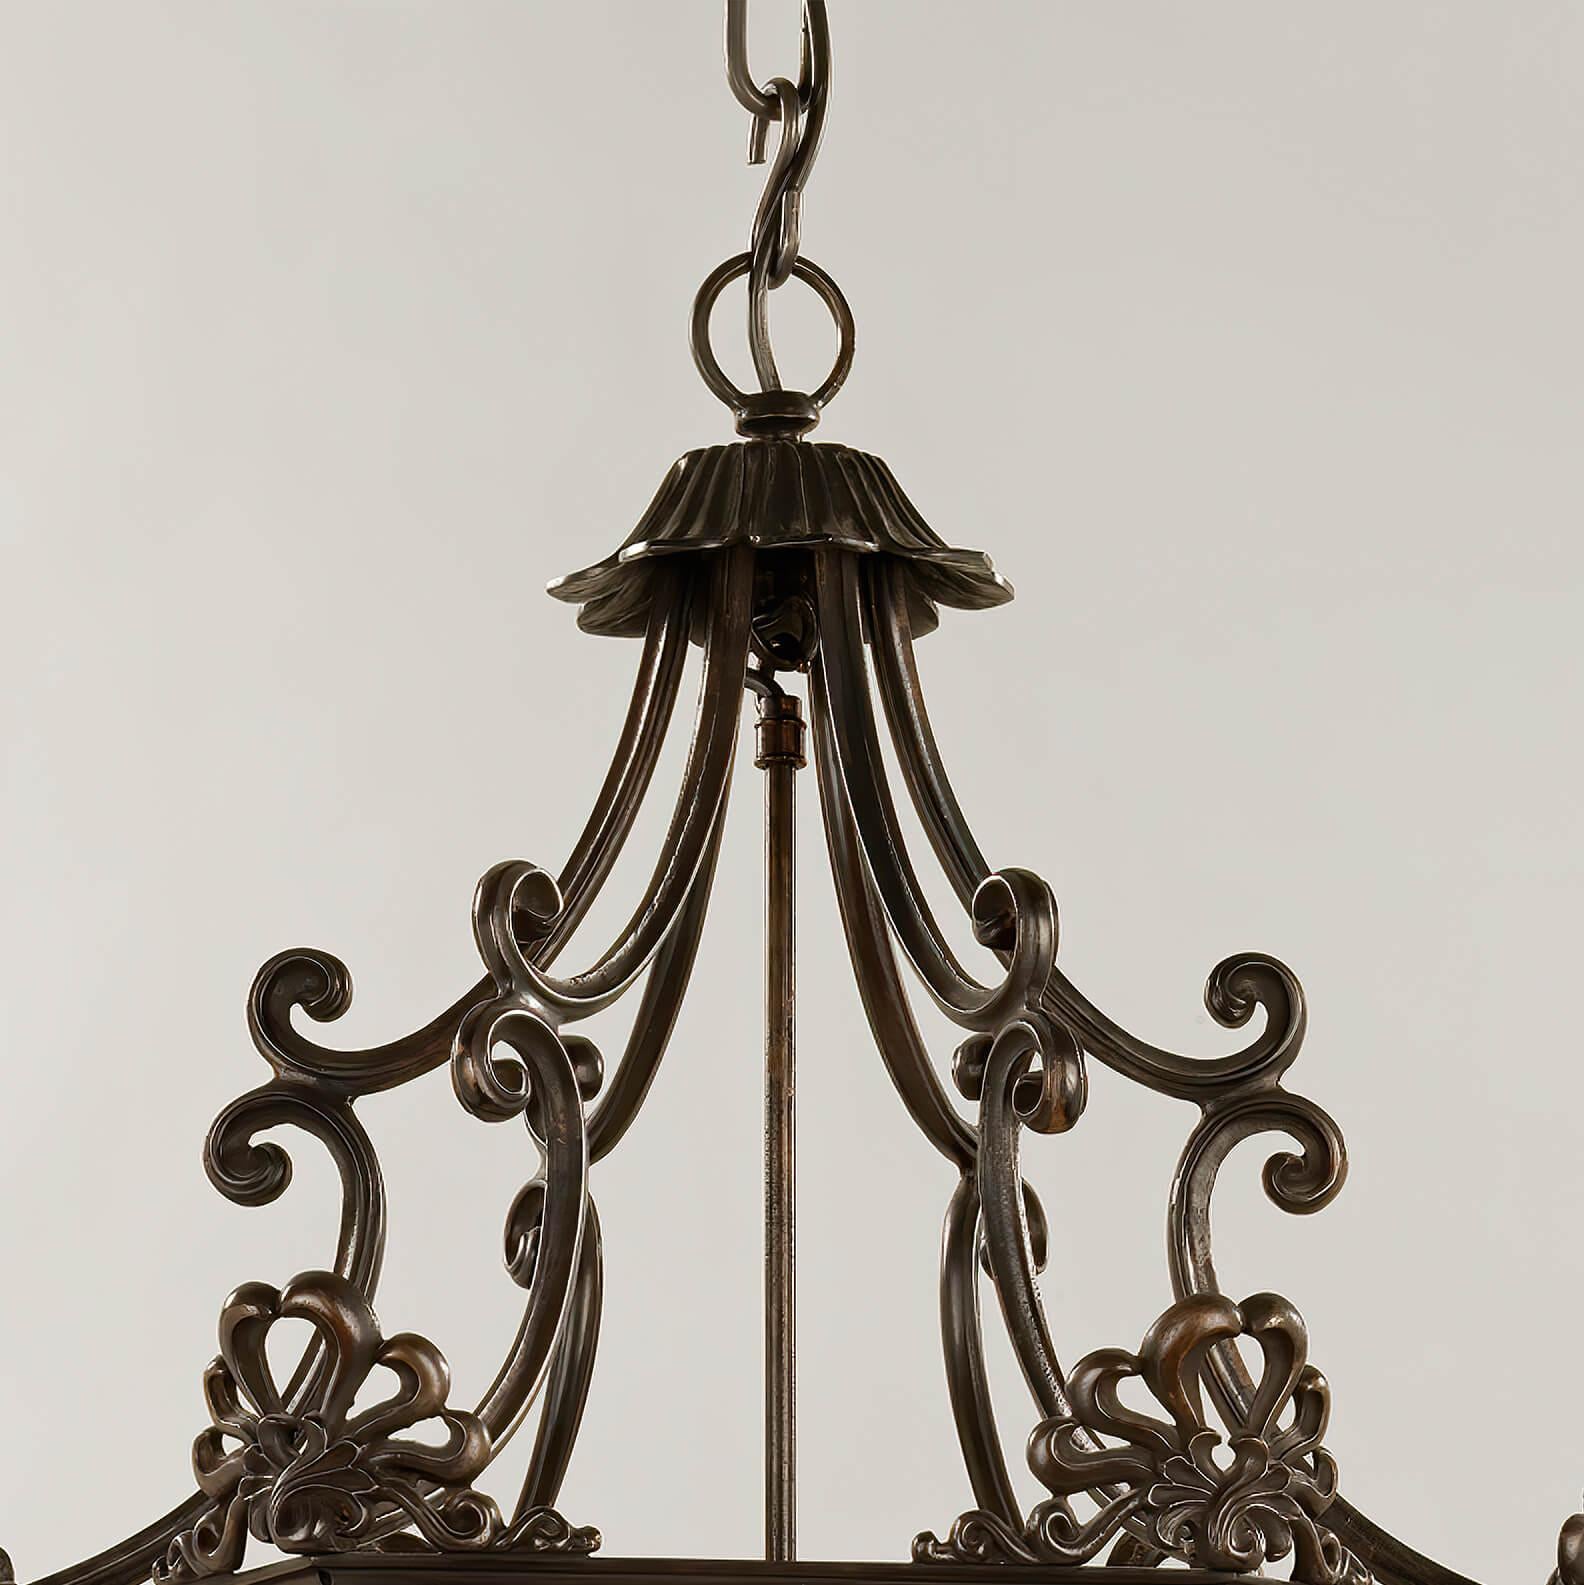 The ornate Georgian bronzed hexagonal hall lantern with pagoda form scroll metal crown, with Anthemion forged mounts, six glass panels with door, a Fleur-de-lis mounted column frame with five-lights and melon ball base finials.

Dimensions: 21.5